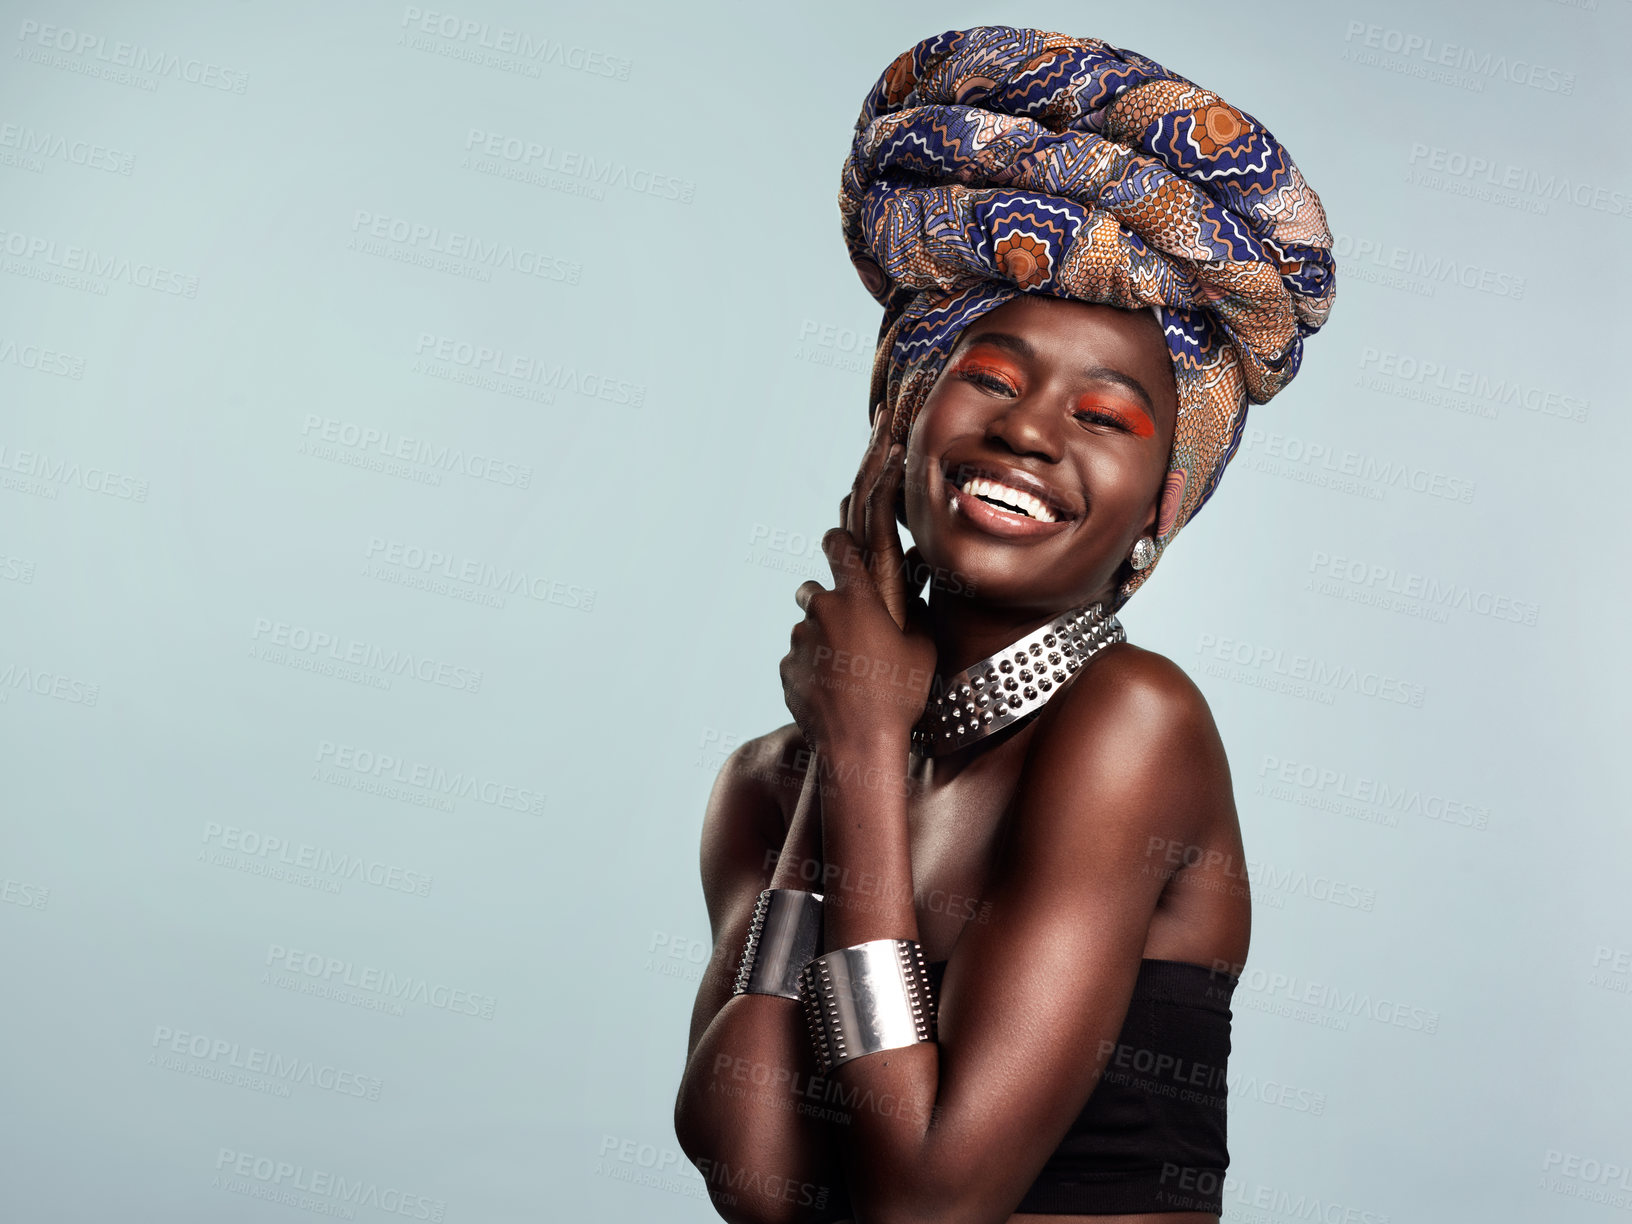 Buy stock photo Studio shot of a beautiful young woman wearing a traditional African head wrap against a grey background